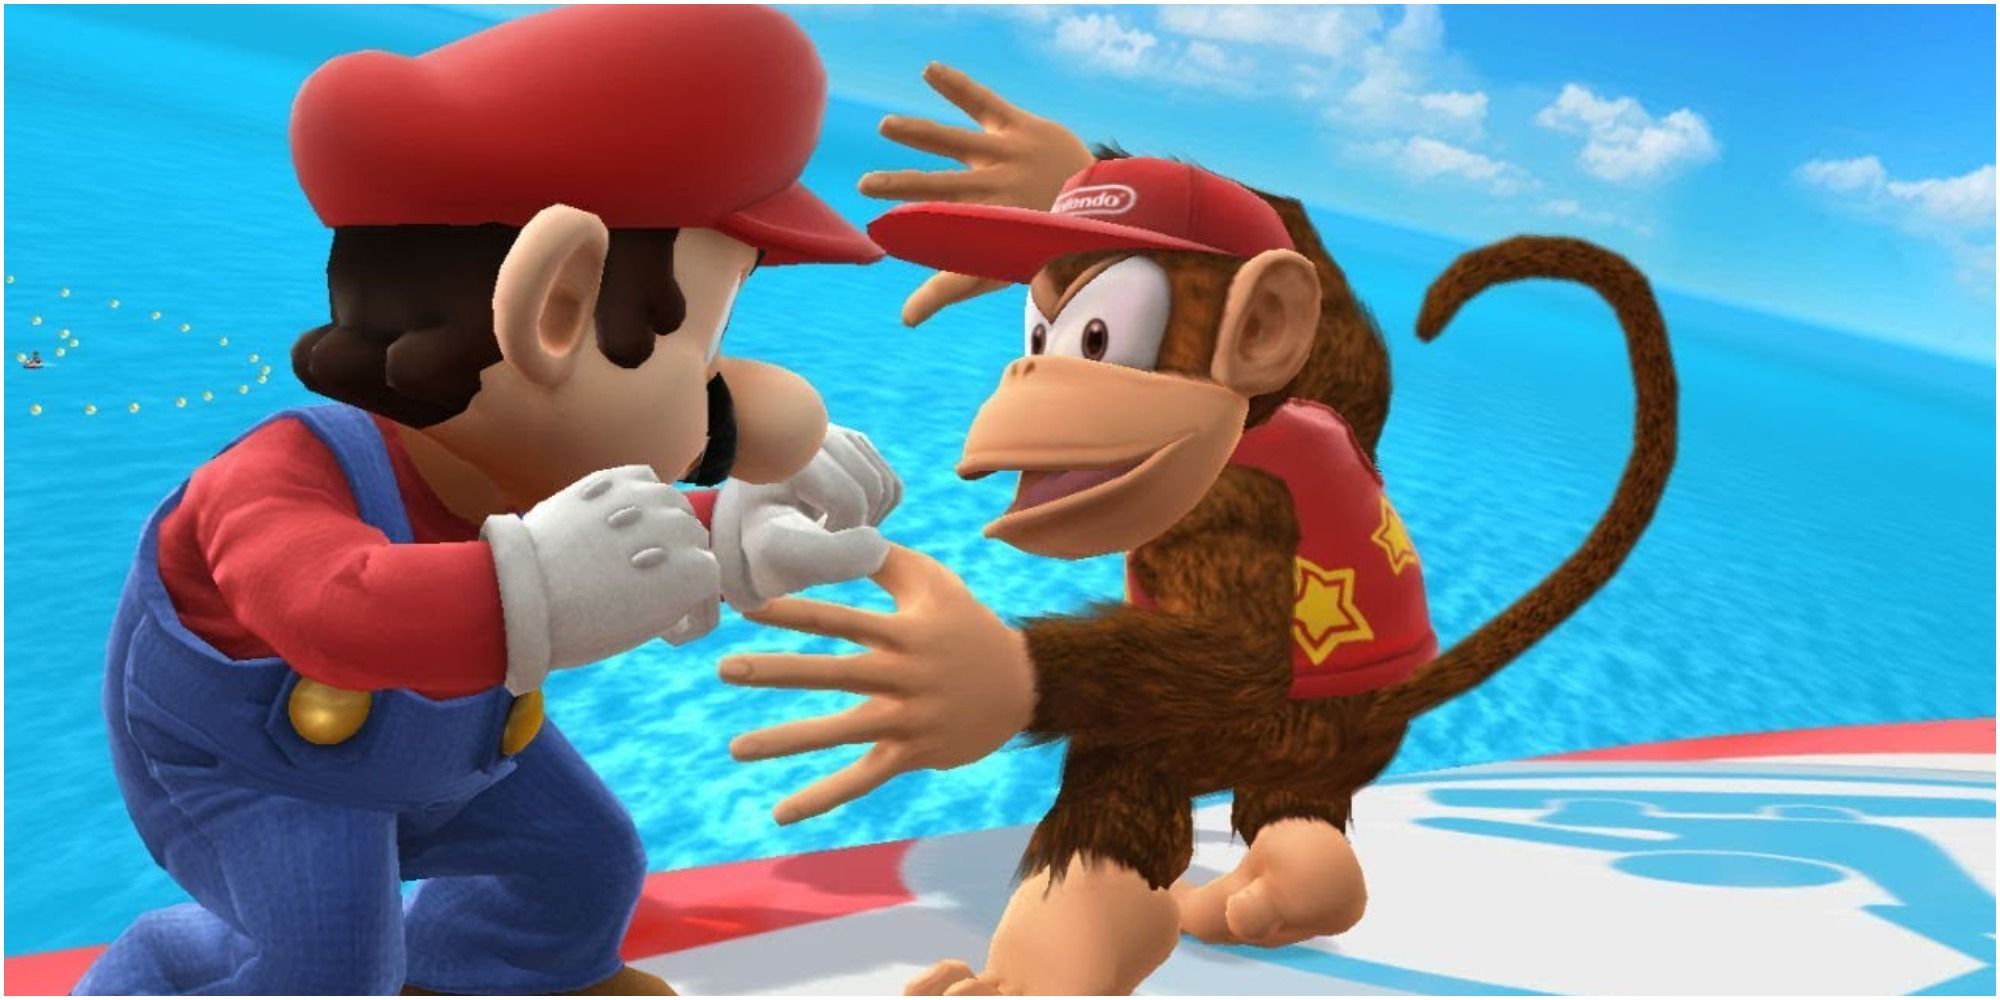 Smash 4 Diddy Kong Fighting Mario In The Ocean